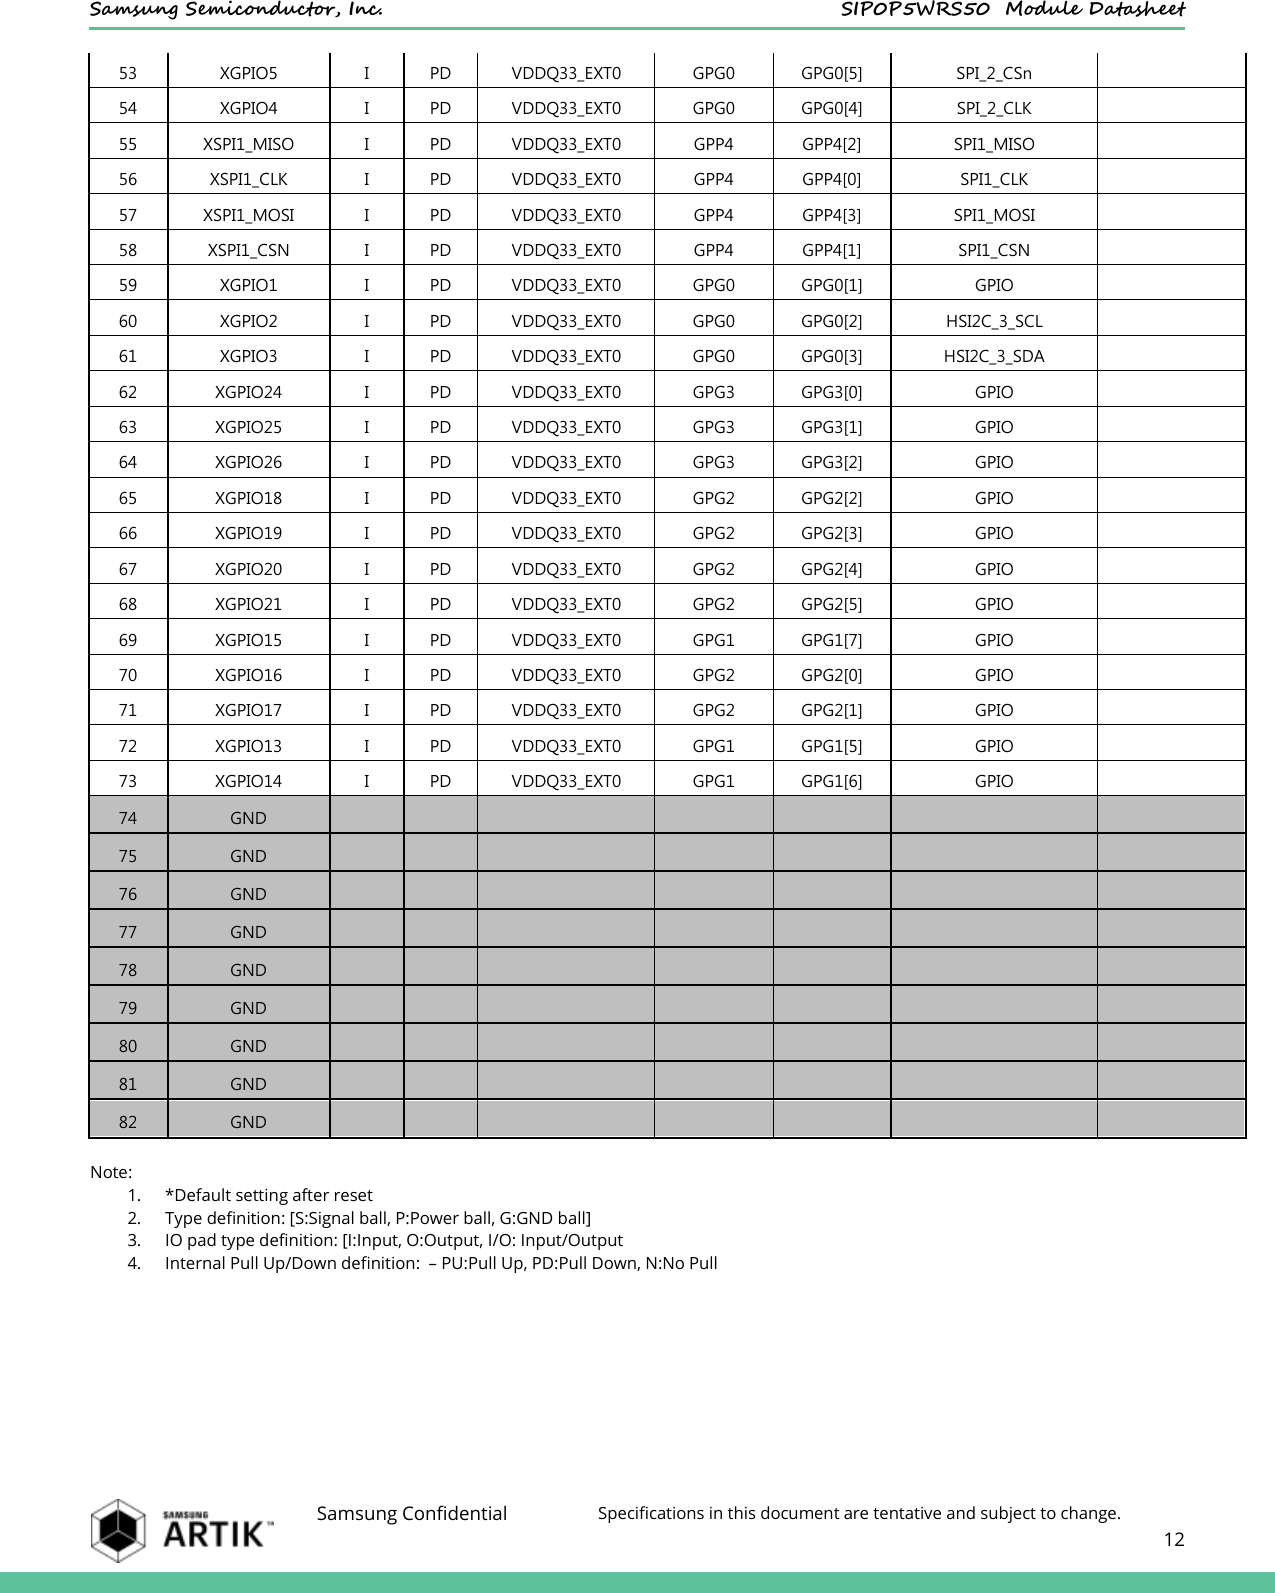    Samsung Semiconductor, Inc.  SIP0P5WRS50  Module Datasheet    Samsung Confidential Specifications in this document are tentative and subject to change.  12  53 XGPIO5 I PD VDDQ33_EXT0 GPG0 GPG0[5] SPI_2_CSn    54 XGPIO4 I PD VDDQ33_EXT0 GPG0 GPG0[4] SPI_2_CLK    55 XSPI1_MISO I PD VDDQ33_EXT0 GPP4 GPP4[2] SPI1_MISO    56 XSPI1_CLK I PD VDDQ33_EXT0 GPP4 GPP4[0] SPI1_CLK    57 XSPI1_MOSI I PD VDDQ33_EXT0 GPP4 GPP4[3] SPI1_MOSI    58 XSPI1_CSN I PD VDDQ33_EXT0 GPP4 GPP4[1] SPI1_CSN    59 XGPIO1 I PD VDDQ33_EXT0 GPG0 GPG0[1] GPIO    60 XGPIO2 I PD VDDQ33_EXT0 GPG0 GPG0[2] HSI2C_3_SCL    61 XGPIO3 I PD VDDQ33_EXT0 GPG0 GPG0[3] HSI2C_3_SDA    62 XGPIO24 I PD VDDQ33_EXT0 GPG3 GPG3[0] GPIO    63 XGPIO25 I PD VDDQ33_EXT0 GPG3 GPG3[1] GPIO    64 XGPIO26 I PD VDDQ33_EXT0 GPG3 GPG3[2] GPIO    65 XGPIO18 I PD VDDQ33_EXT0 GPG2 GPG2[2] GPIO    66 XGPIO19 I PD VDDQ33_EXT0 GPG2 GPG2[3] GPIO    67 XGPIO20 I PD VDDQ33_EXT0 GPG2 GPG2[4] GPIO    68 XGPIO21 I PD VDDQ33_EXT0 GPG2 GPG2[5] GPIO    69 XGPIO15 I PD VDDQ33_EXT0 GPG1 GPG1[7] GPIO    70 XGPIO16 I PD VDDQ33_EXT0 GPG2 GPG2[0] GPIO    71 XGPIO17 I PD VDDQ33_EXT0 GPG2 GPG2[1] GPIO    72 XGPIO13 I PD VDDQ33_EXT0 GPG1 GPG1[5] GPIO    73 XGPIO14 I PD VDDQ33_EXT0 GPG1 GPG1[6] GPIO    74 GND                      75 GND                      76 GND                      77 GND                      78 GND                      79 GND                      80 GND                      81 GND                      82 GND                       Note: 1. *Default setting after reset 2. Type definition: [S:Signal ball, P:Power ball, G:GND ball] 3. IO pad type definition: [I:Input, O:Output, I/O: Input/Output 4. Internal Pull Up/Down definition:  – PU:Pull Up, PD:Pull Down, N:No Pull    